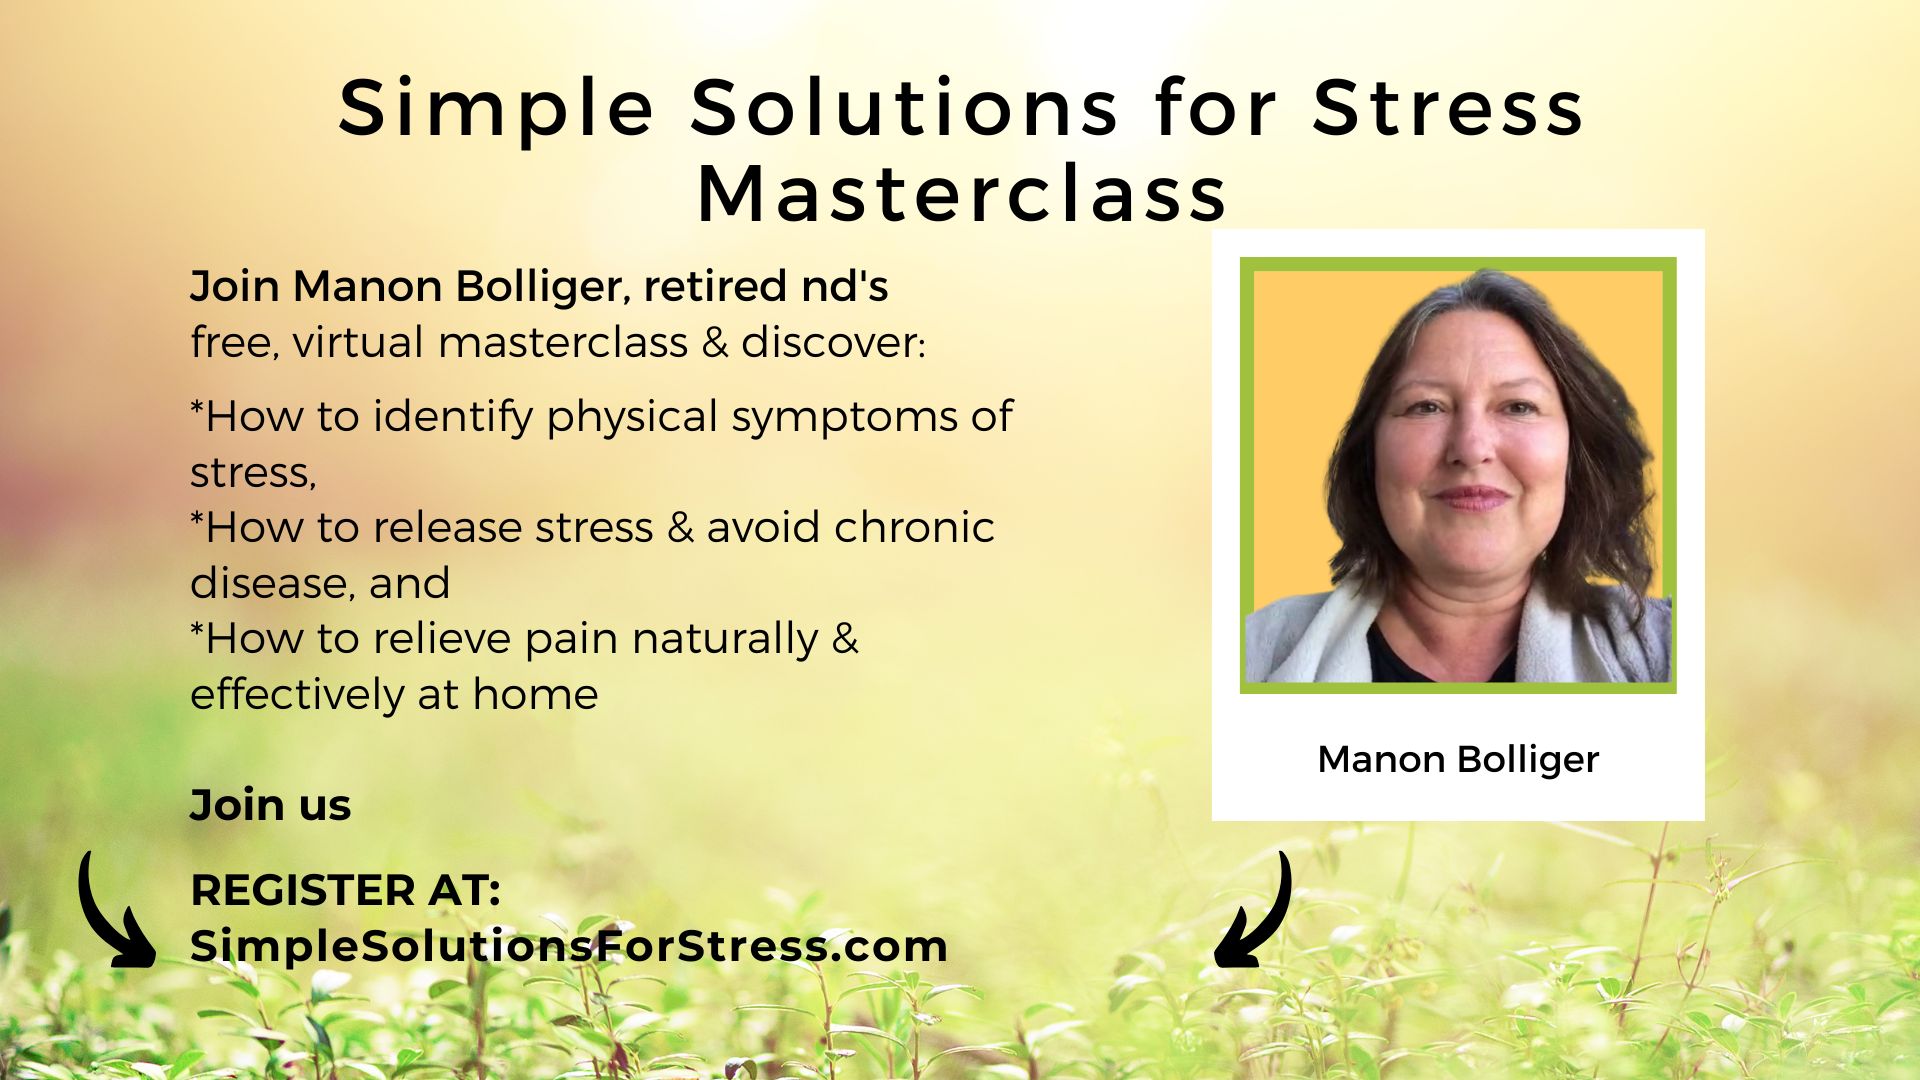 Simple Solutions for Stress